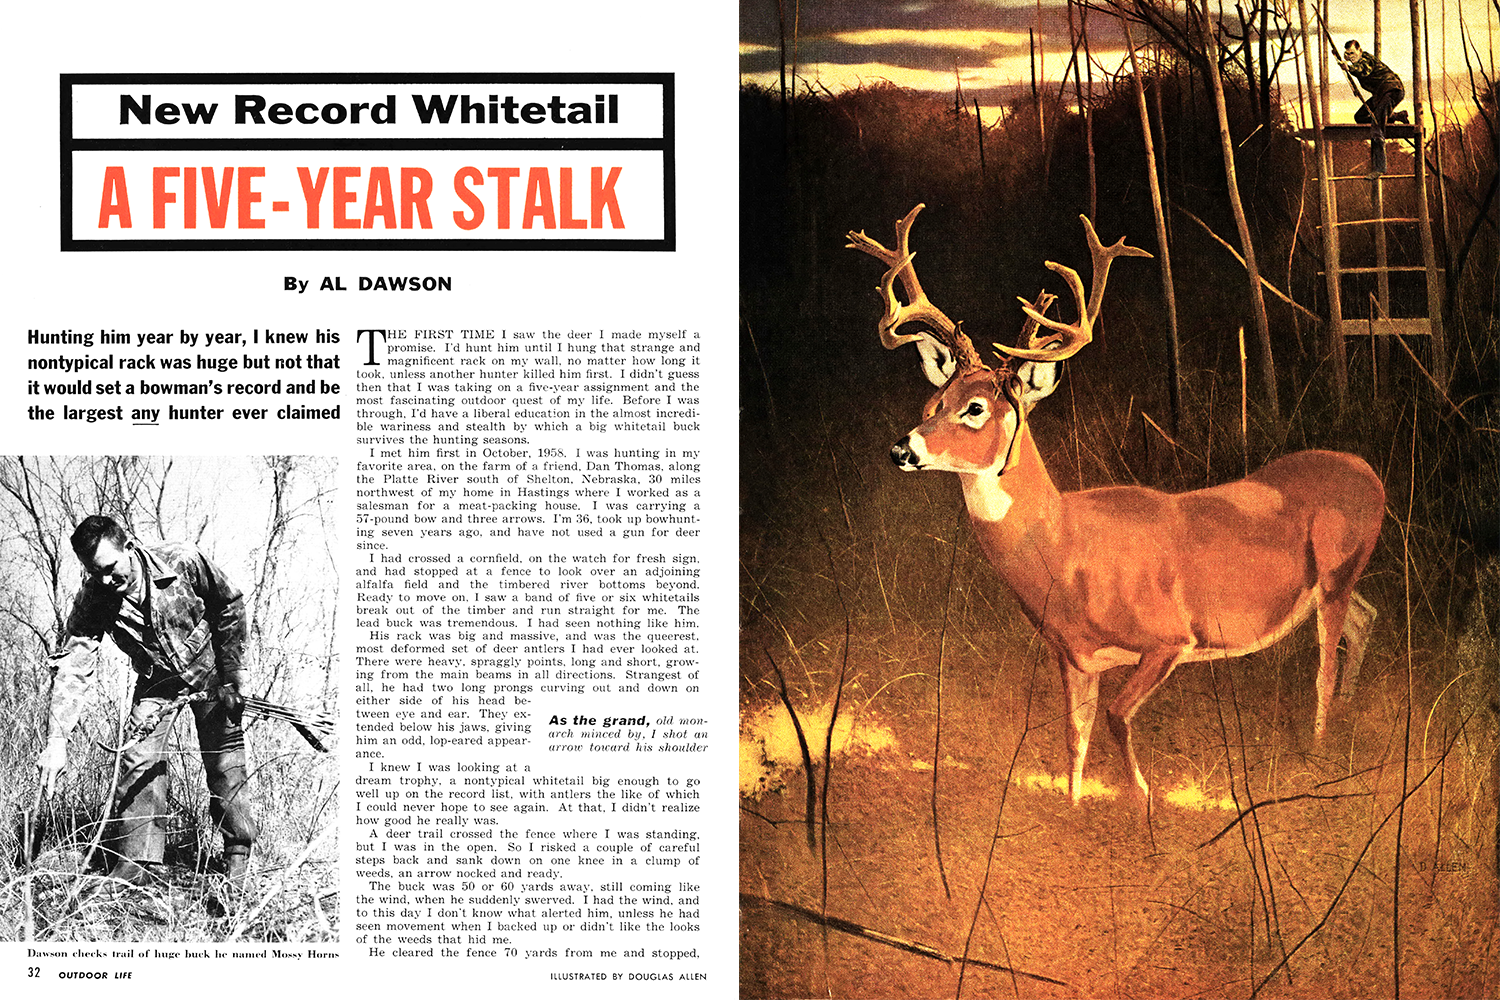 7-Easy Steps to scoring Whitetail Deer- 2020 - FEATHERNETT OUTDOORS